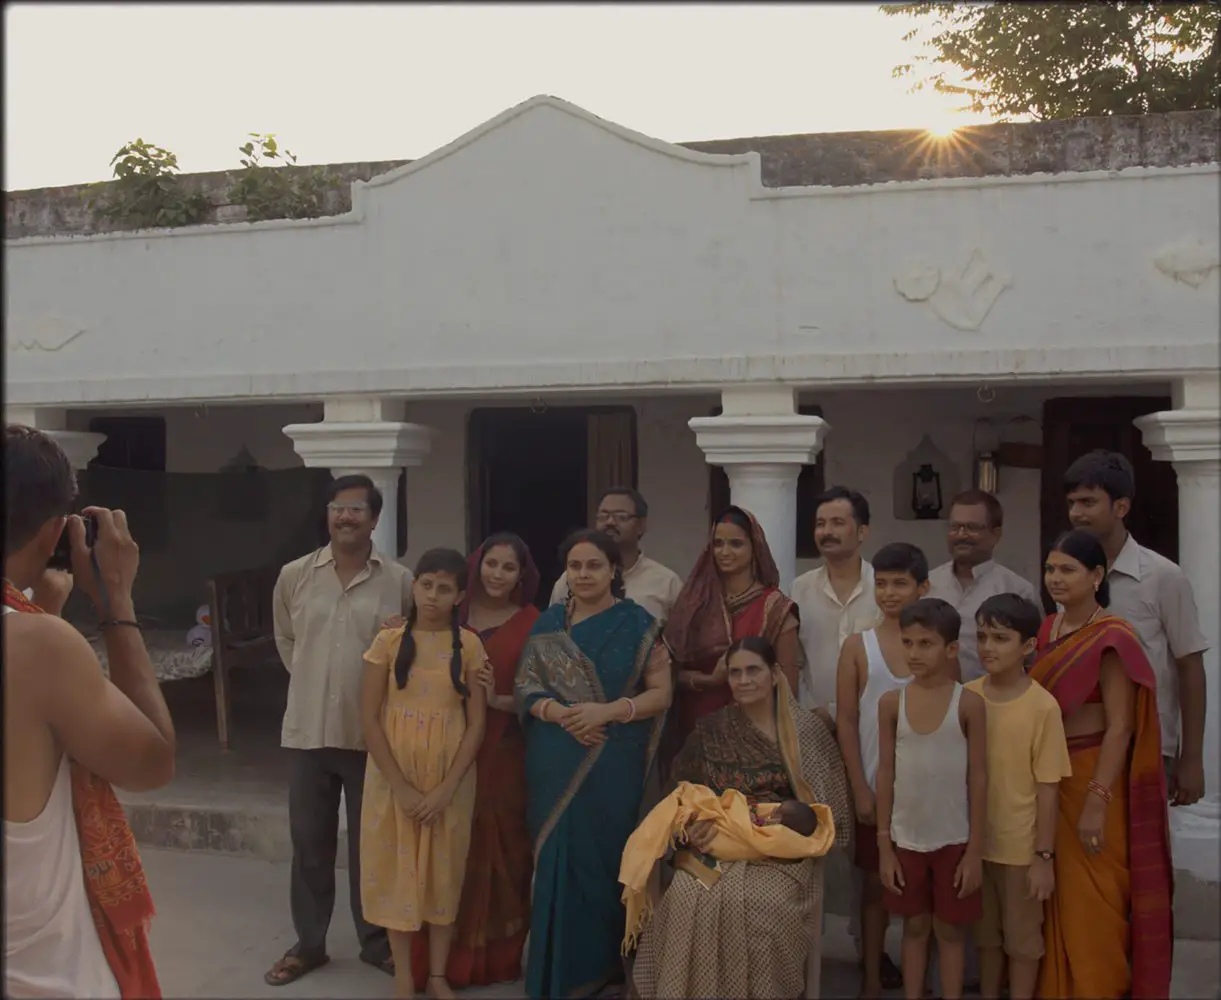 An Indian family poses for a picture in front of their house